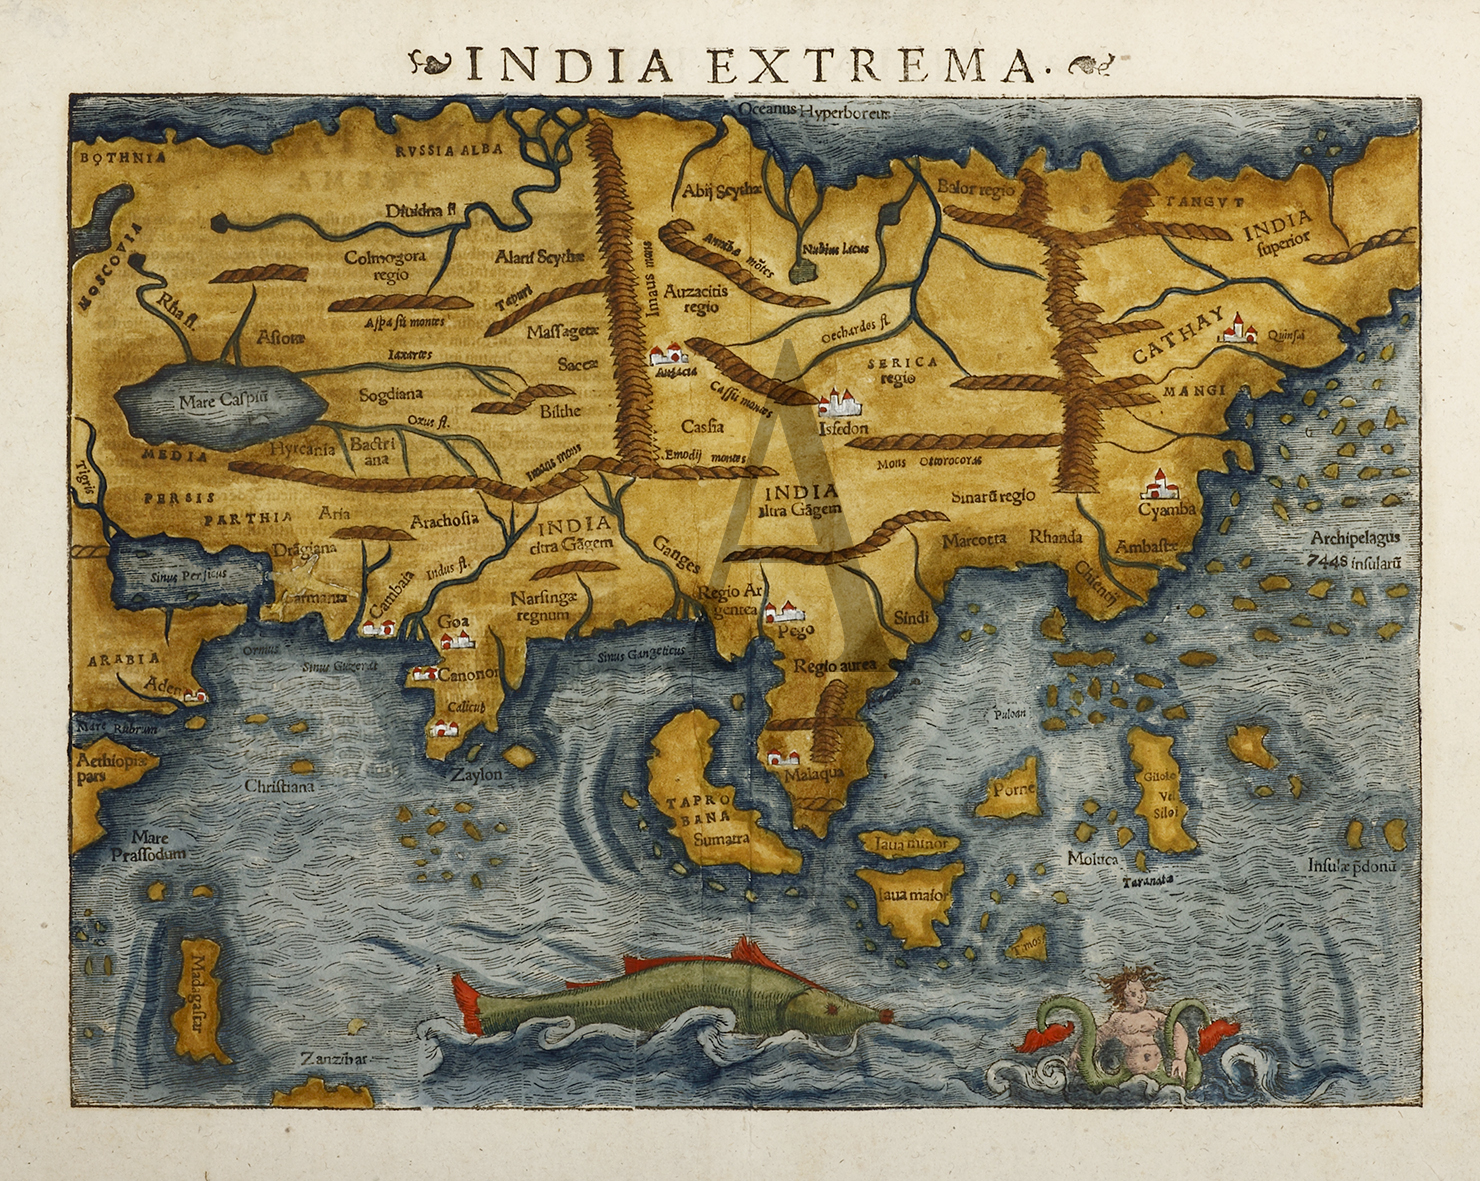 India Extrema - Antique Map from 1545